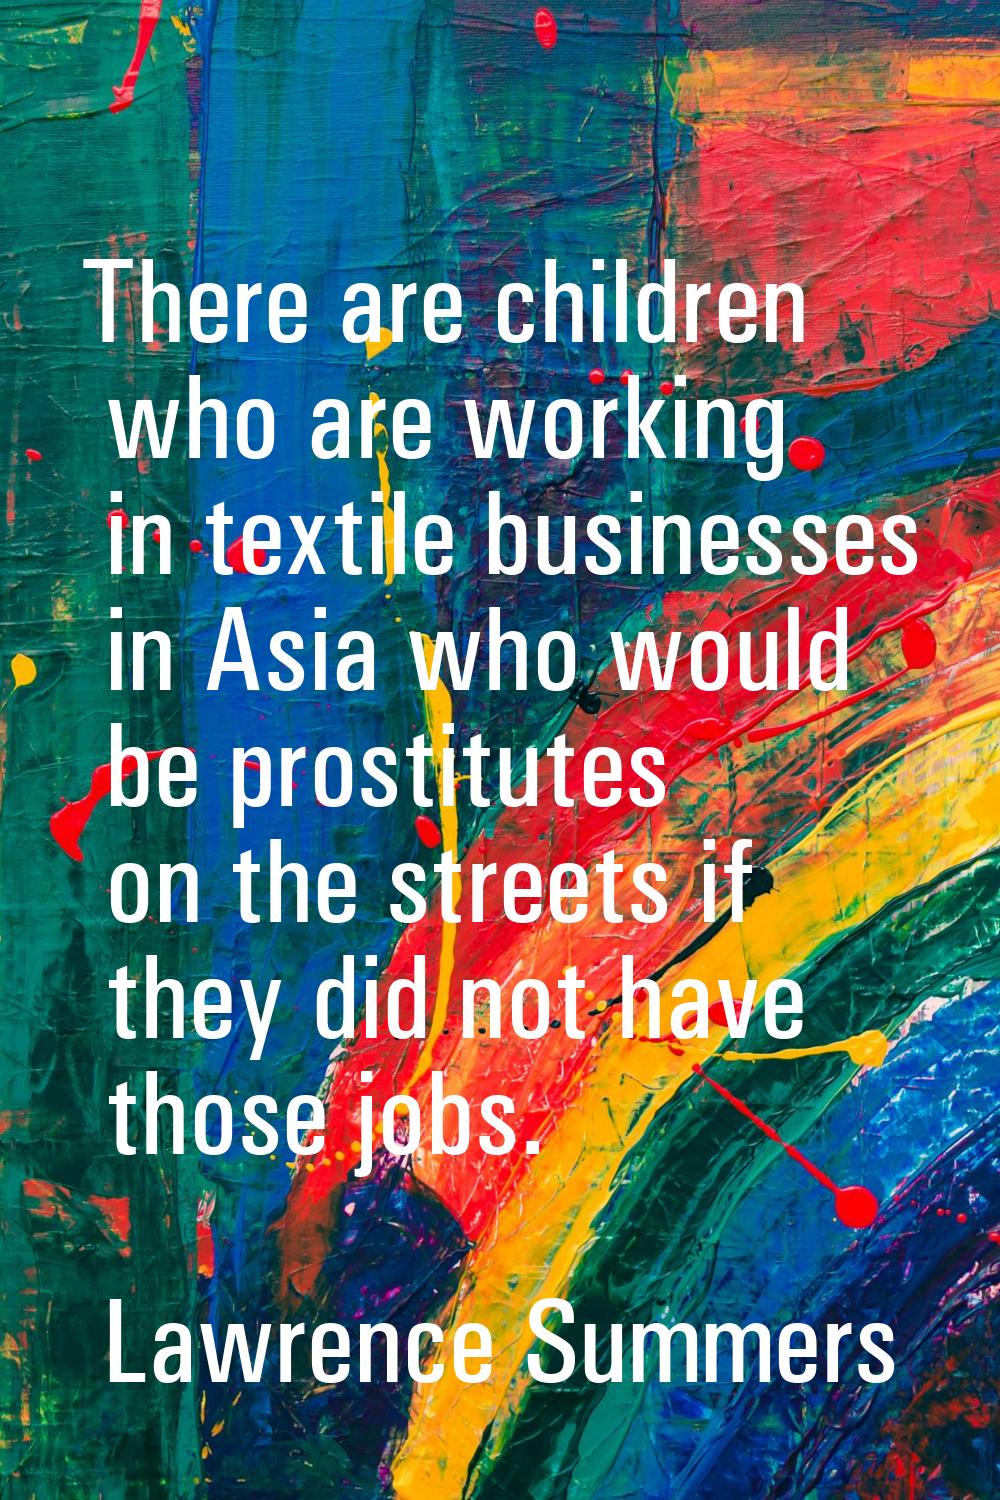 There are children who are working in textile businesses in Asia who would be prostitutes on the st